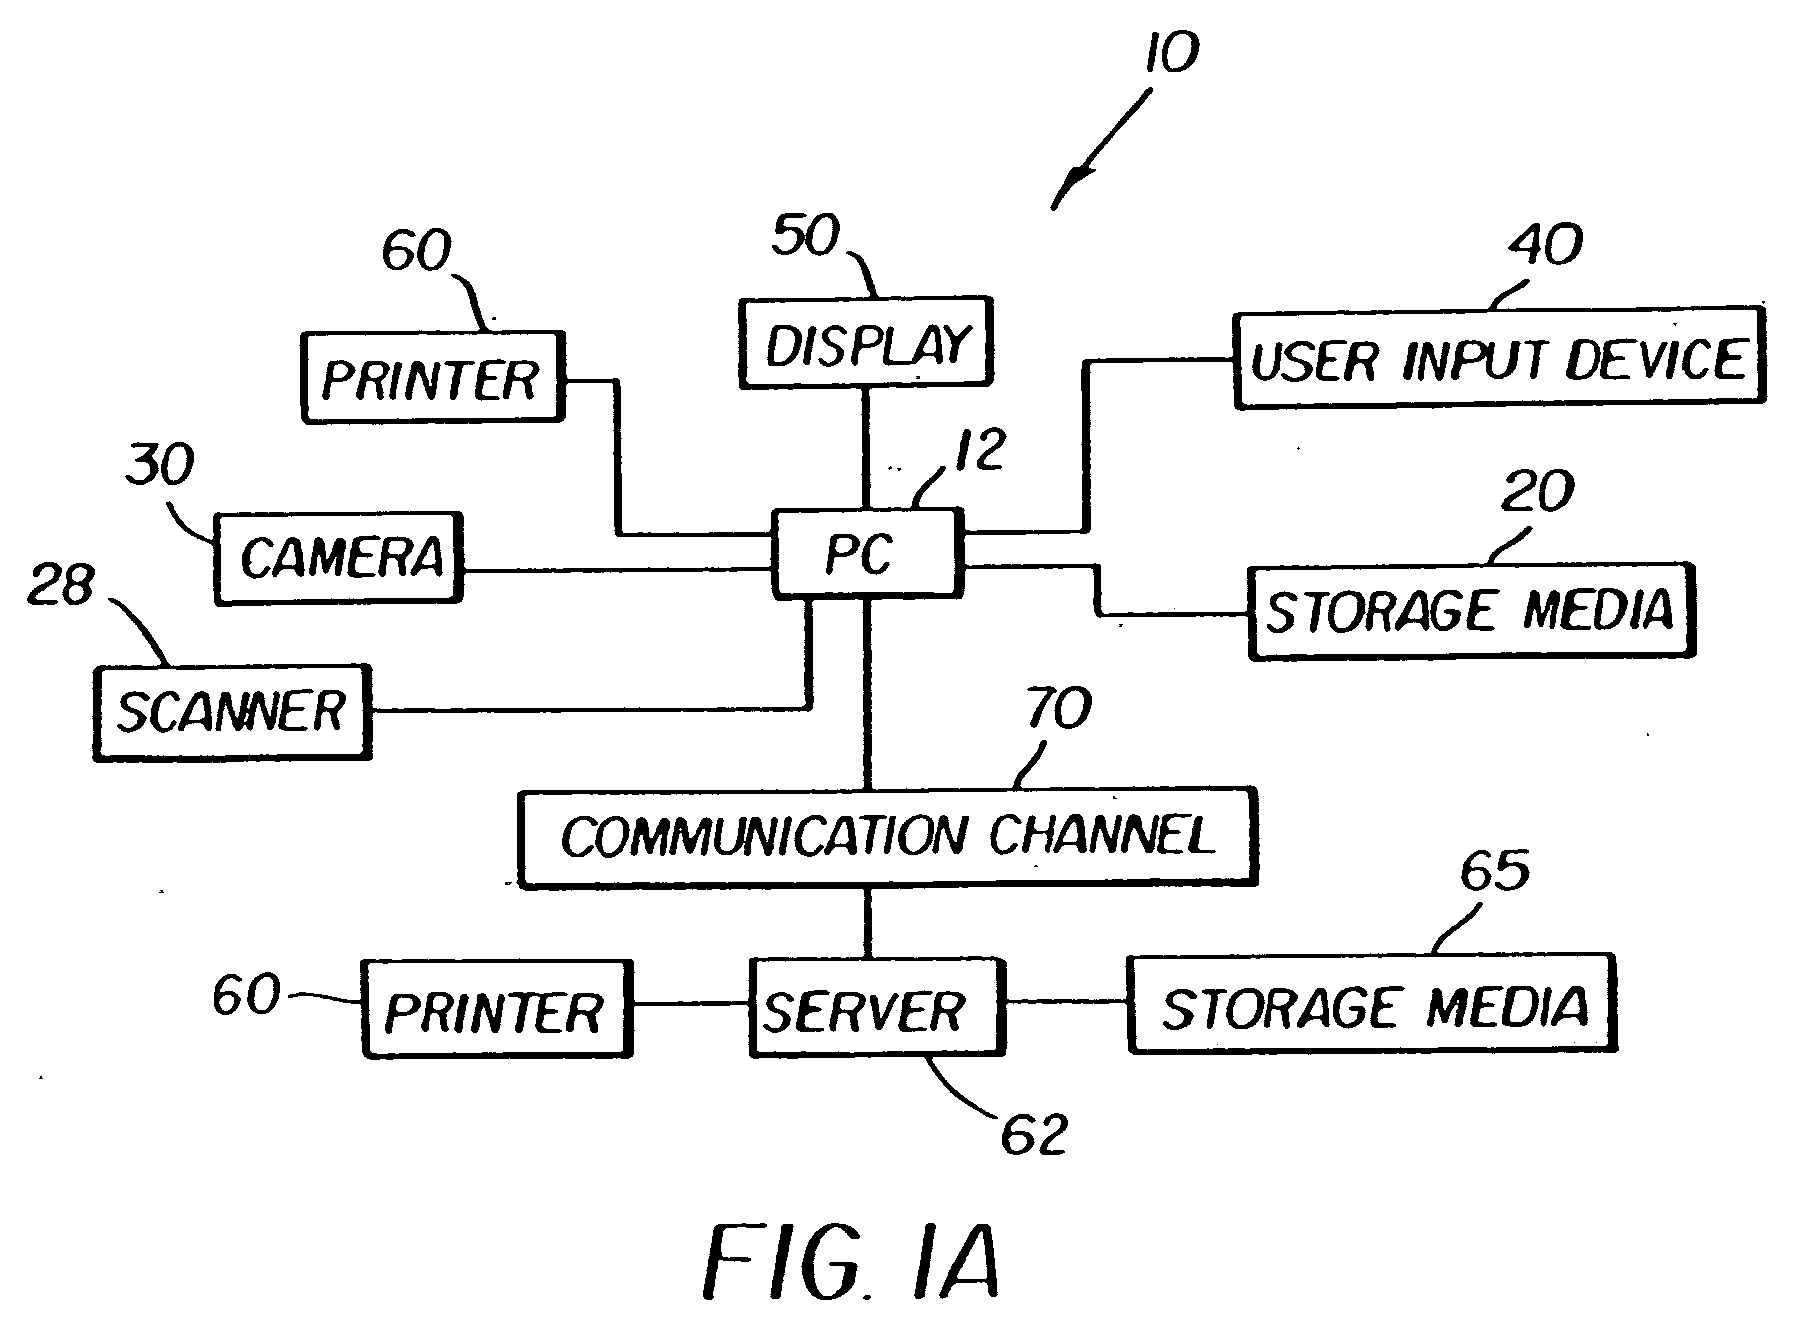 Method and system for enhancing portrait images that are processed in a batch mode